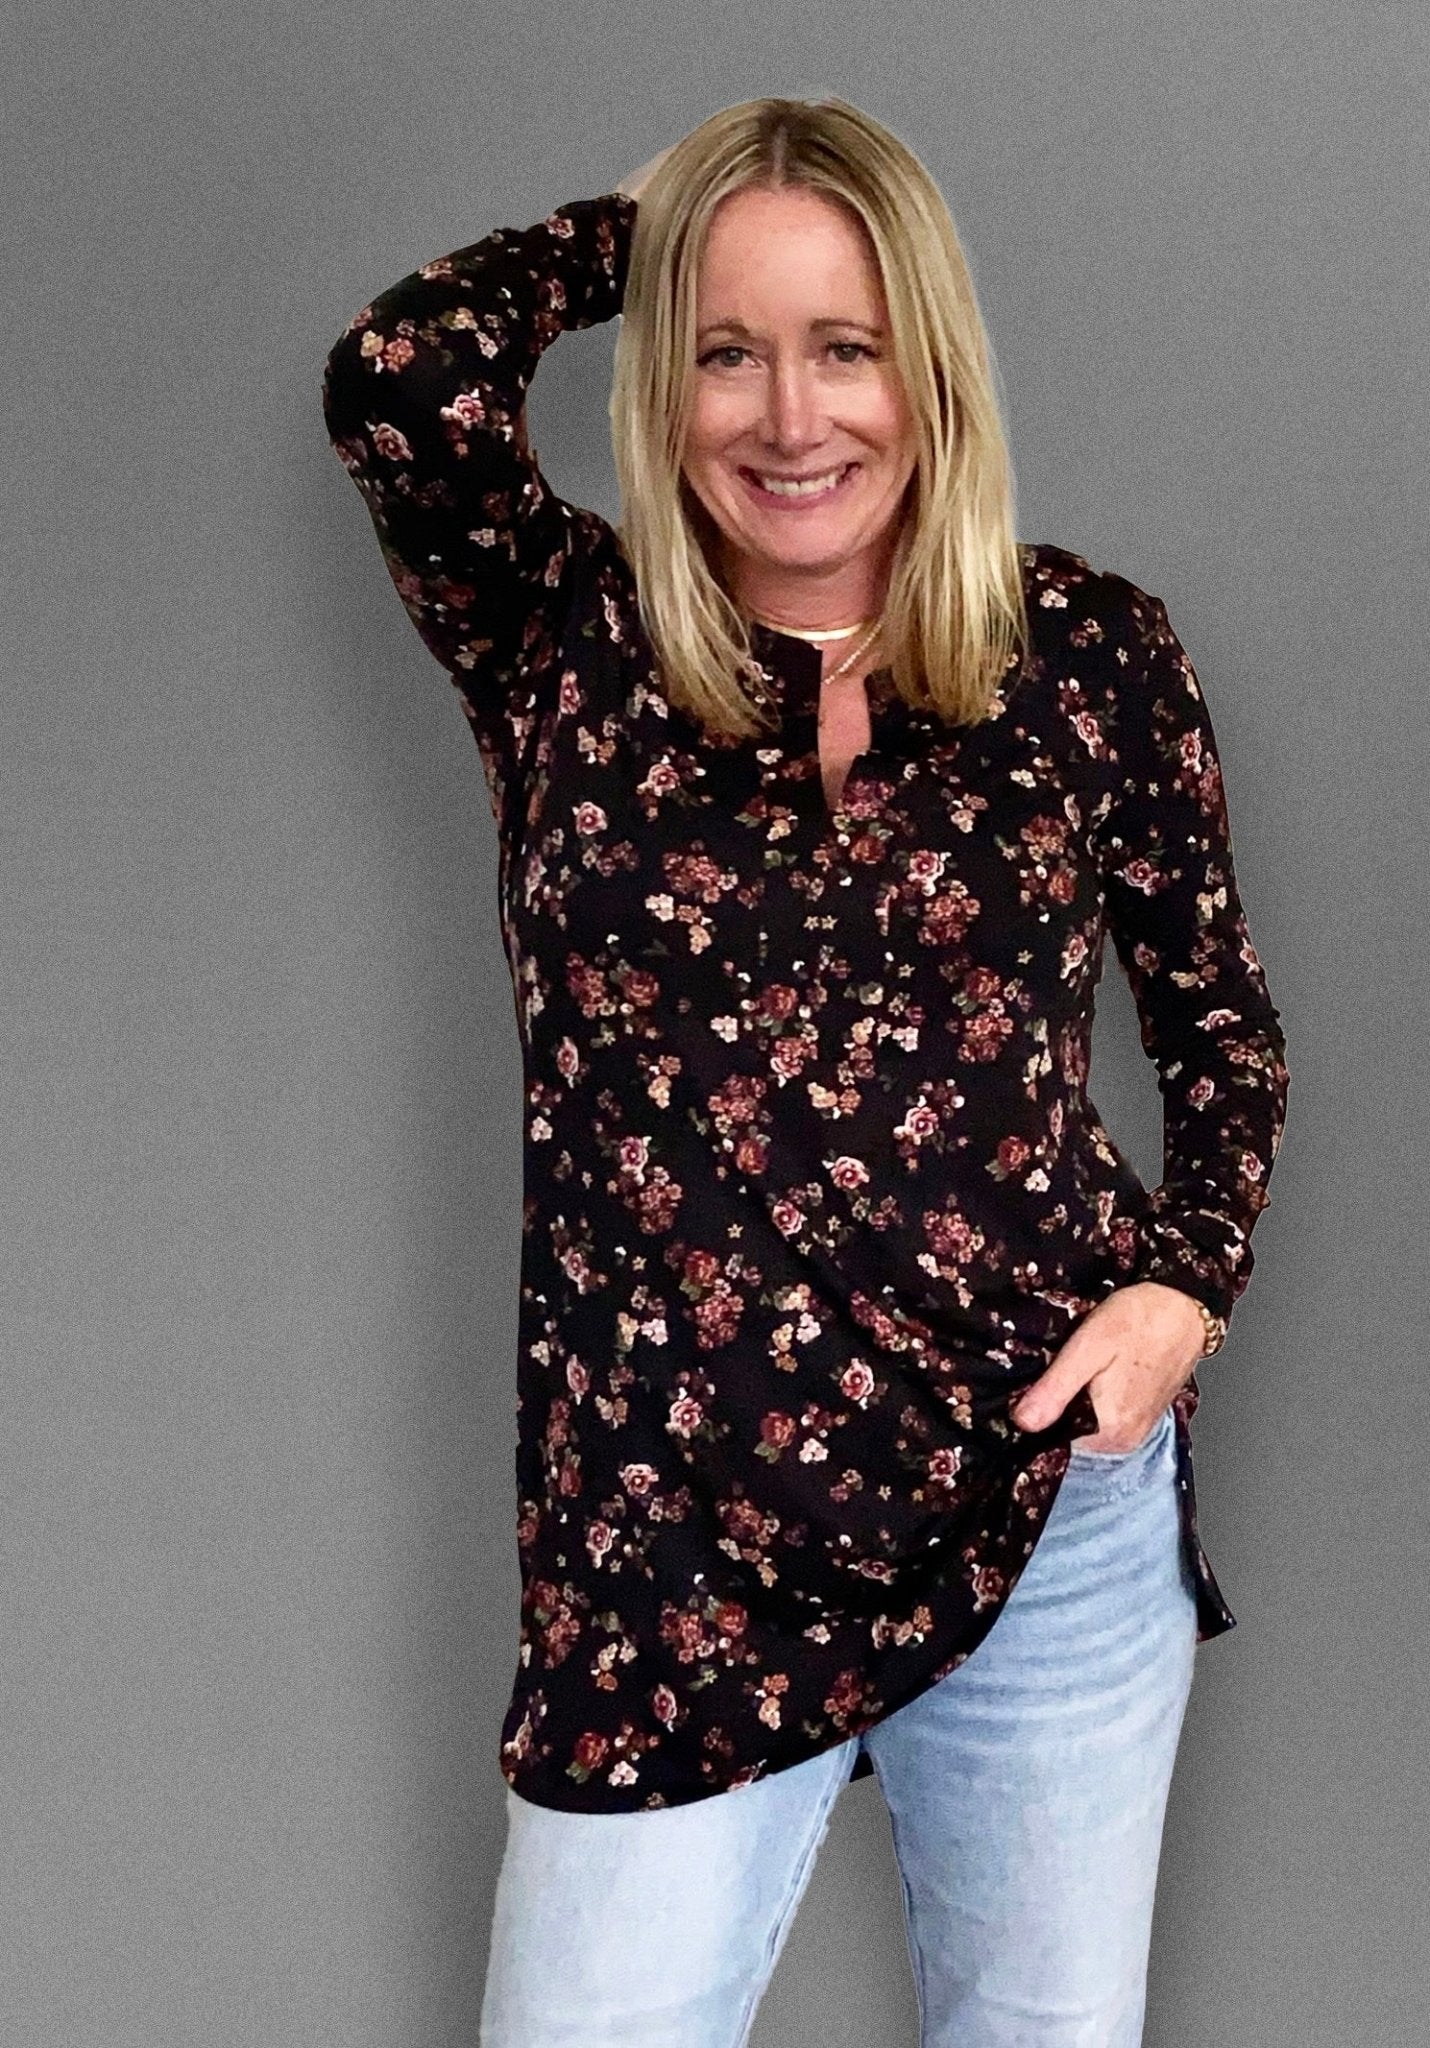 Coming Up Roses Tunic by Dotty, Roses Print, extra long sleeves, split V-neck, matte jersey, banded hi-low hem with side splits, sizes S to XL, made in Toronto